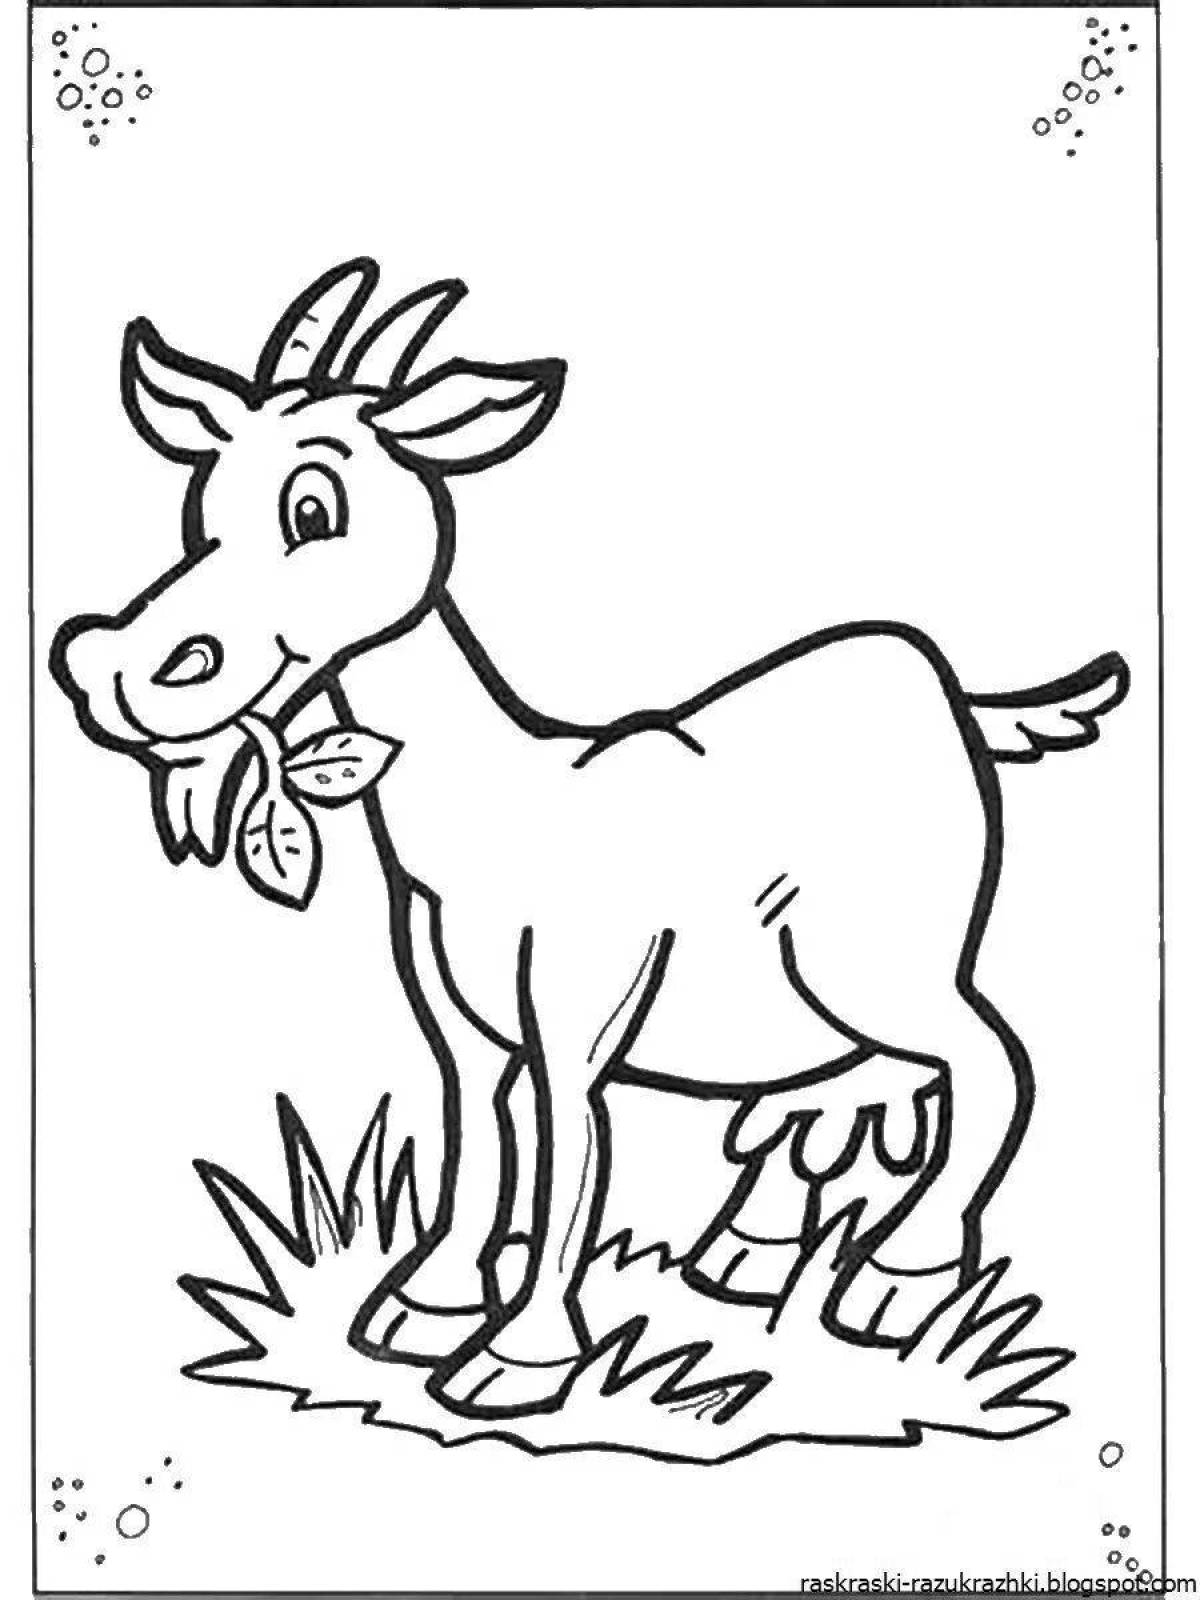 Creative goat coloring for kids